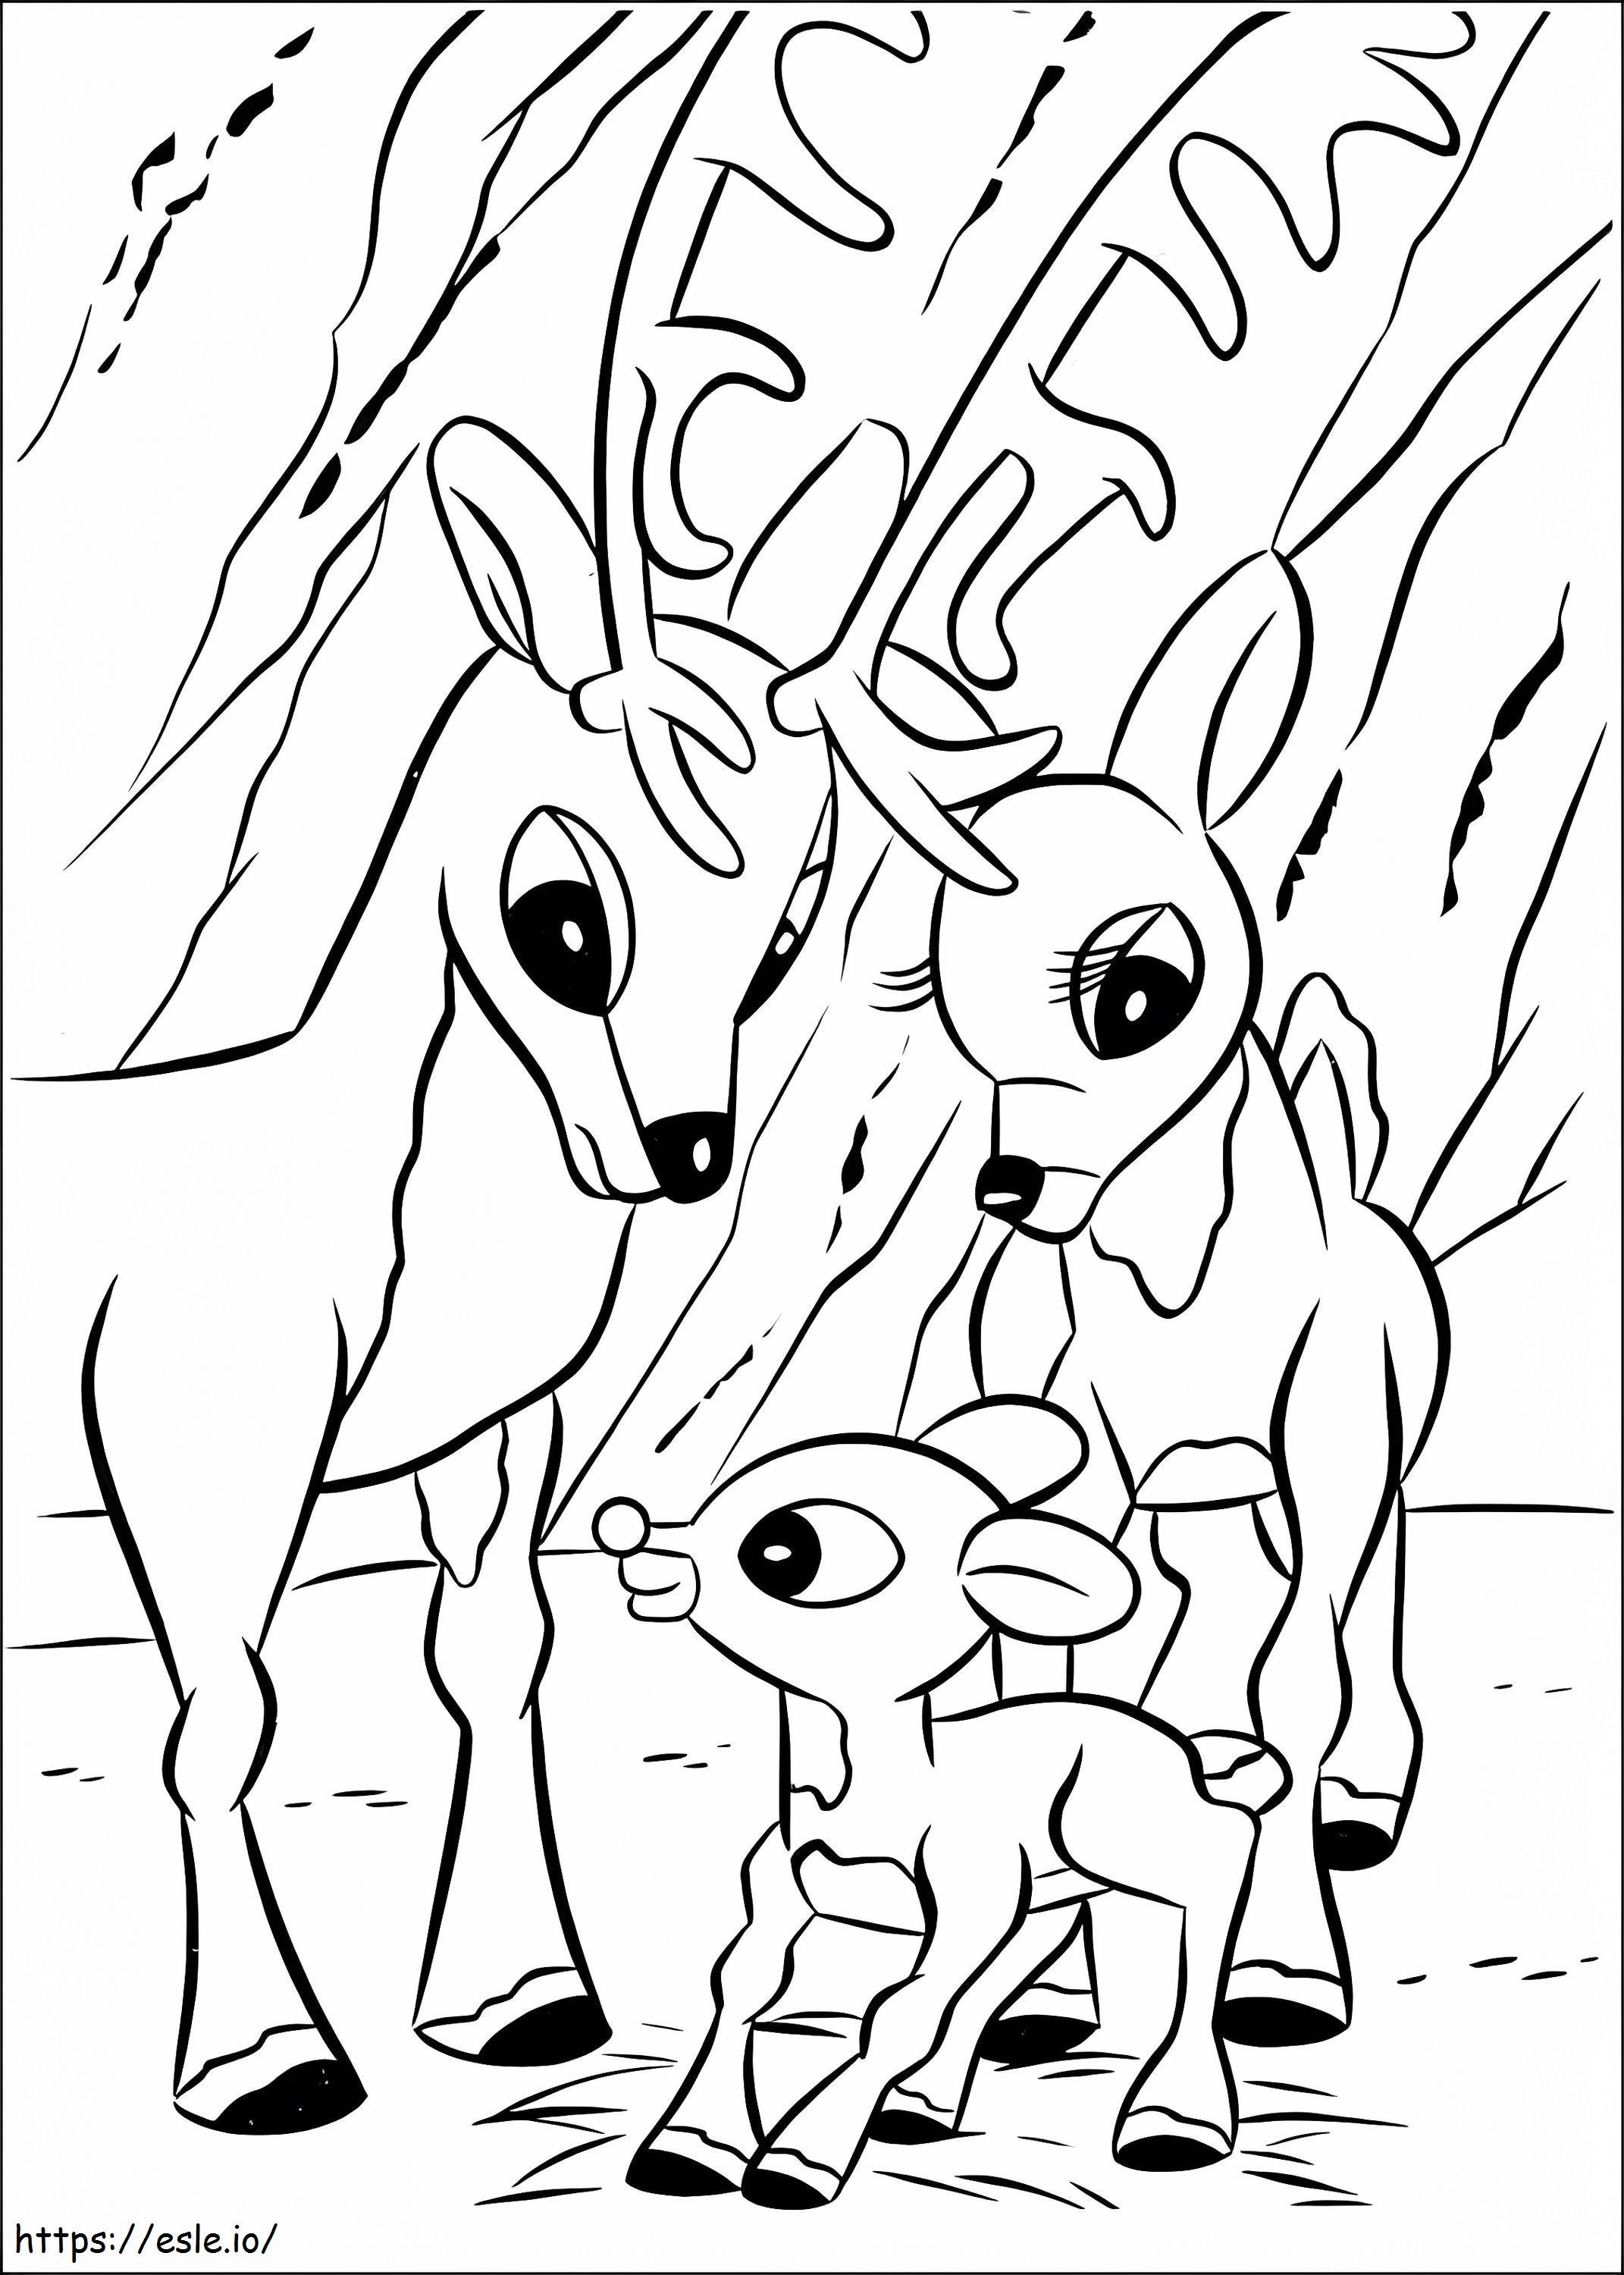 Rudolph And Family coloring page